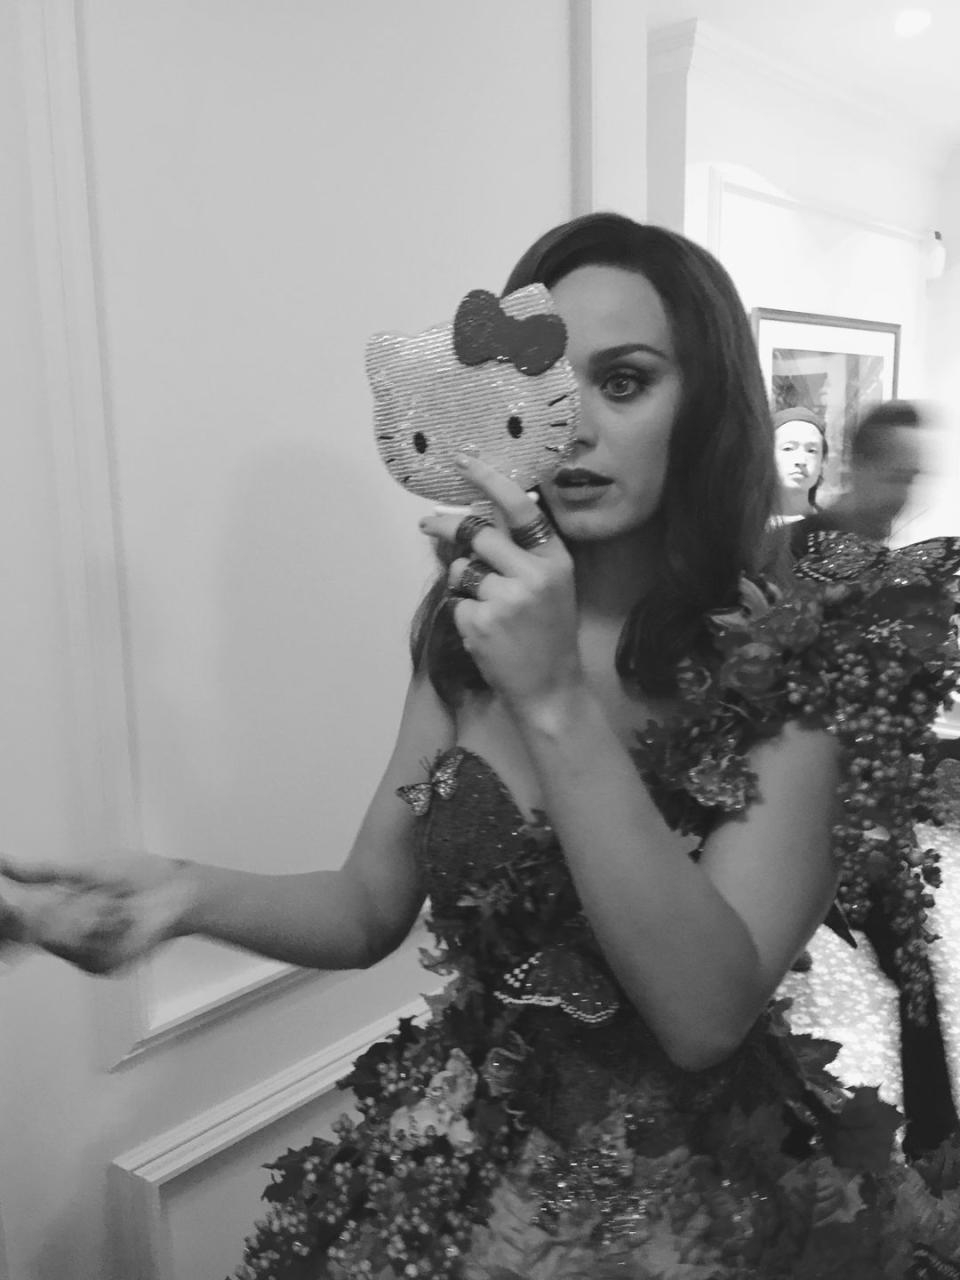 Katy Perry Plus 1: The Pop Star Gets Ready for Bazaar Icons